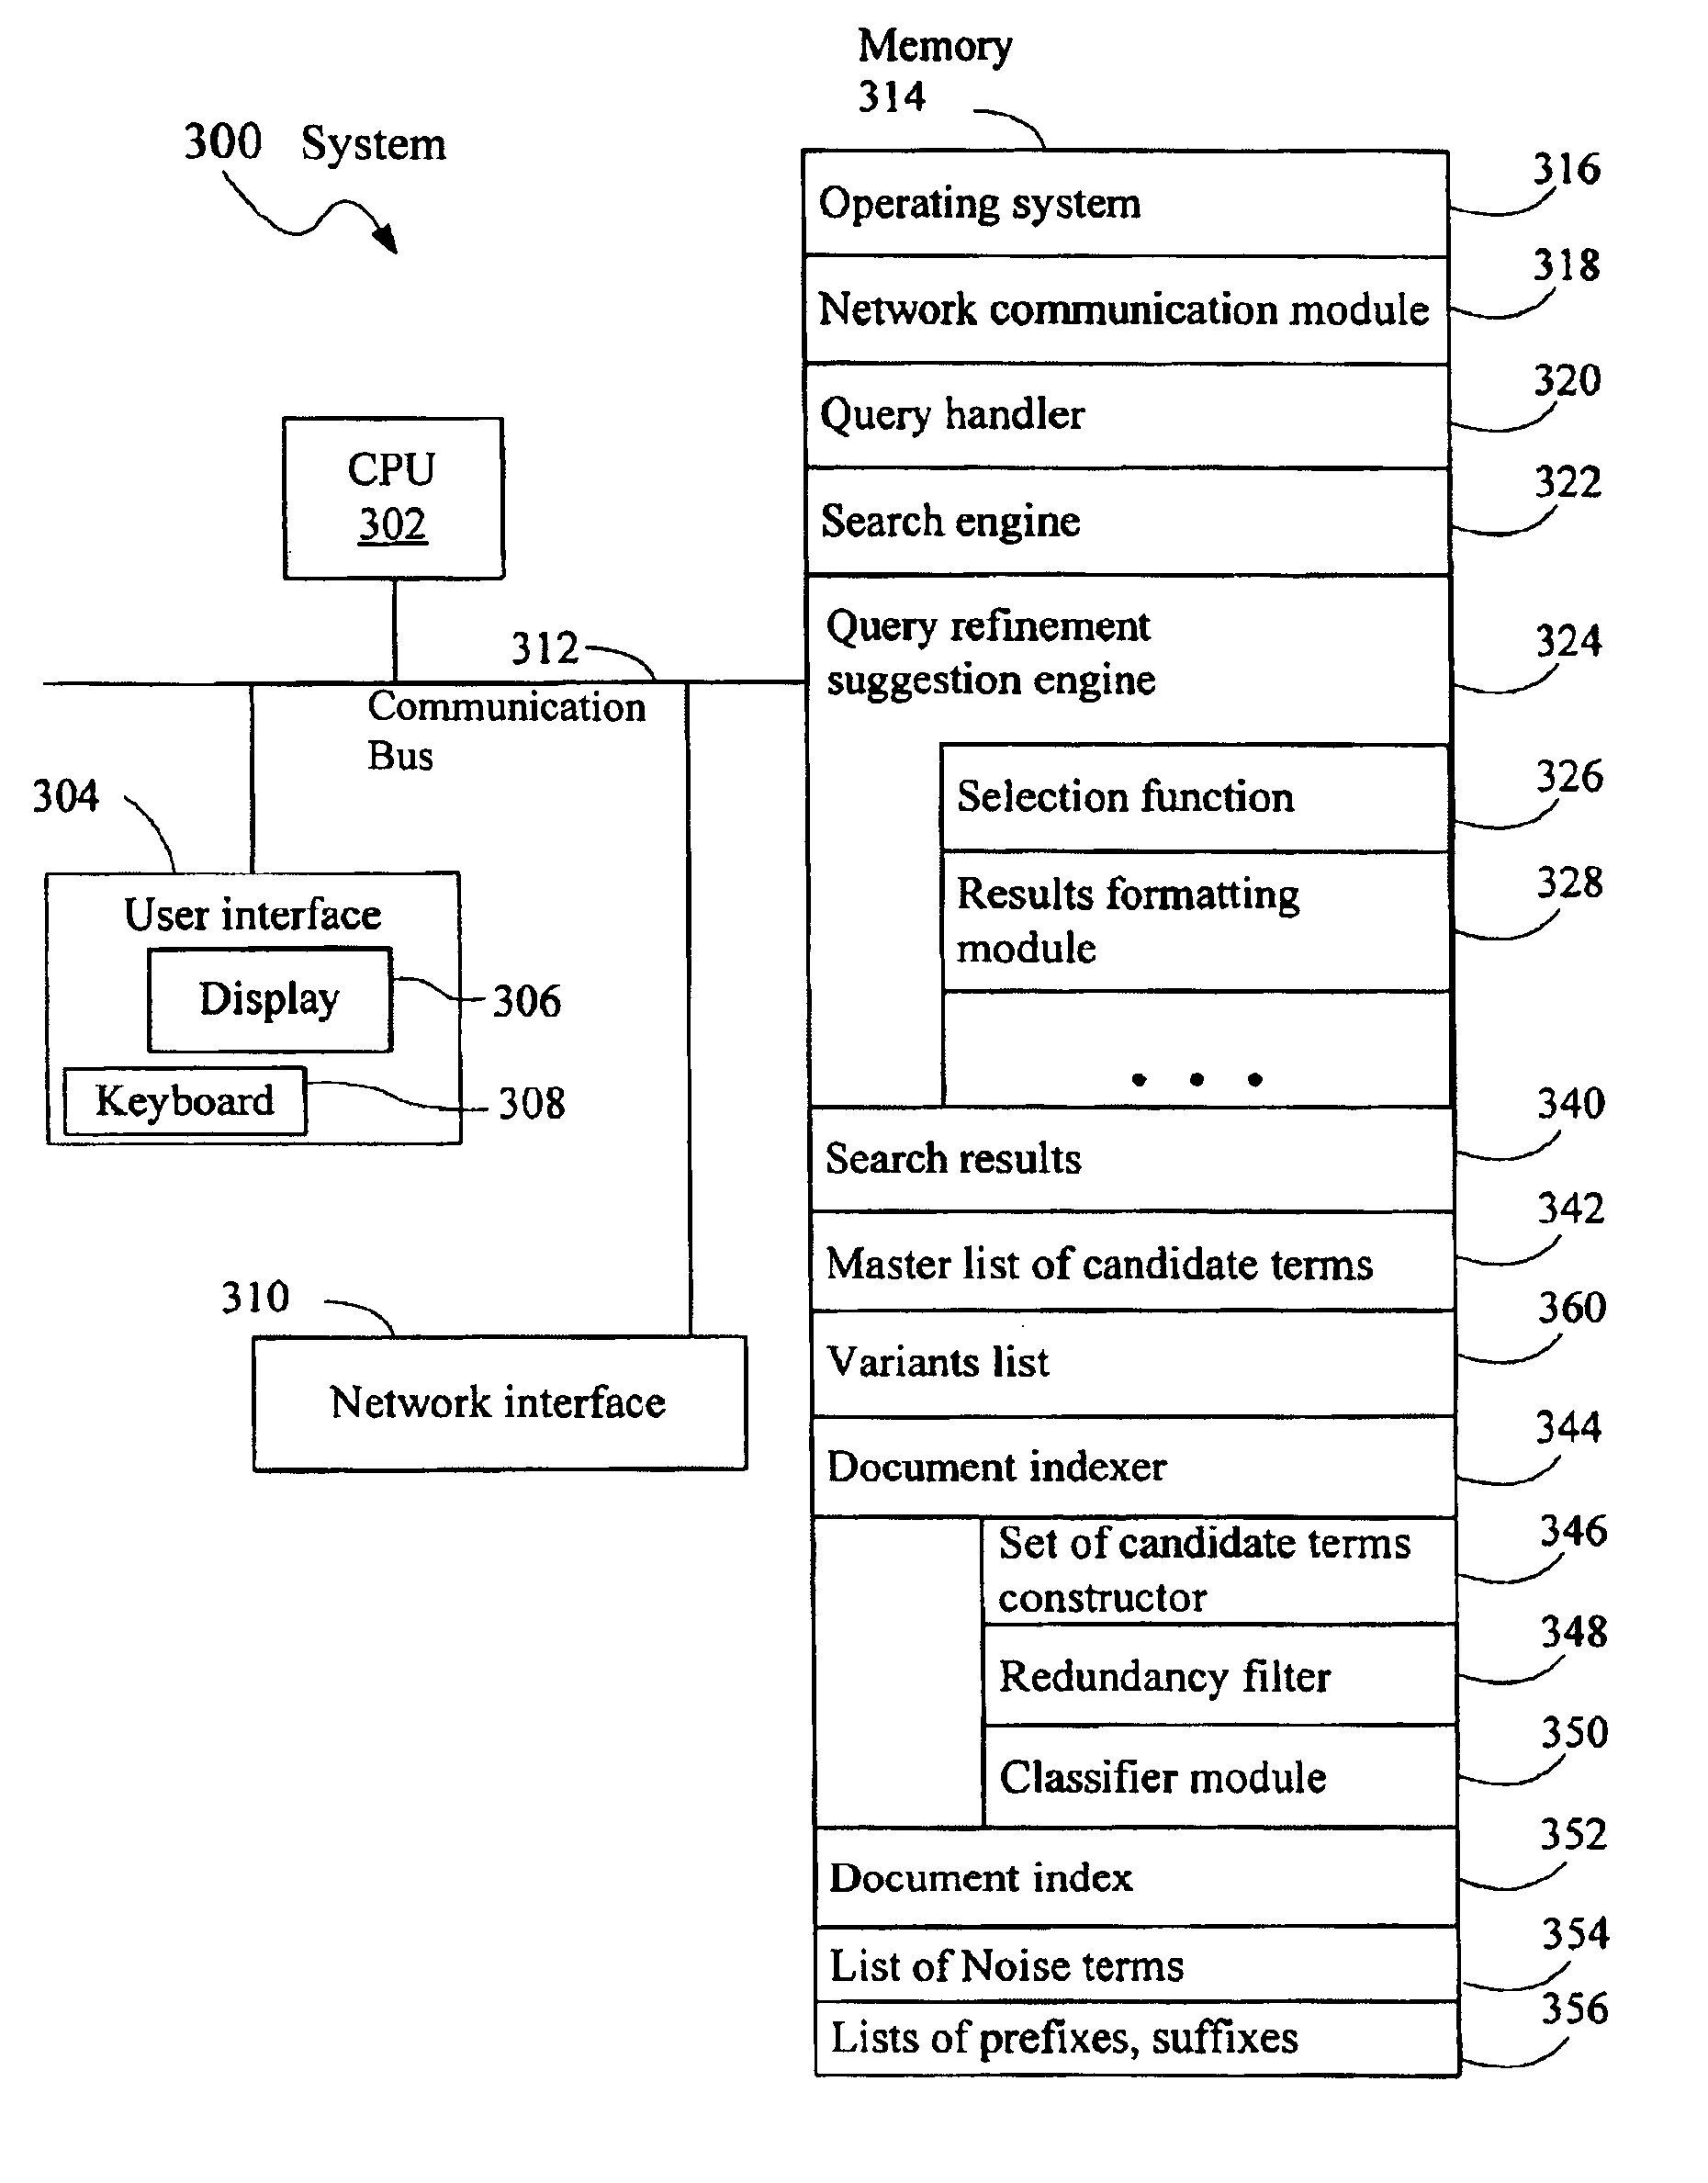 Systems and methods for interactive search query refinement